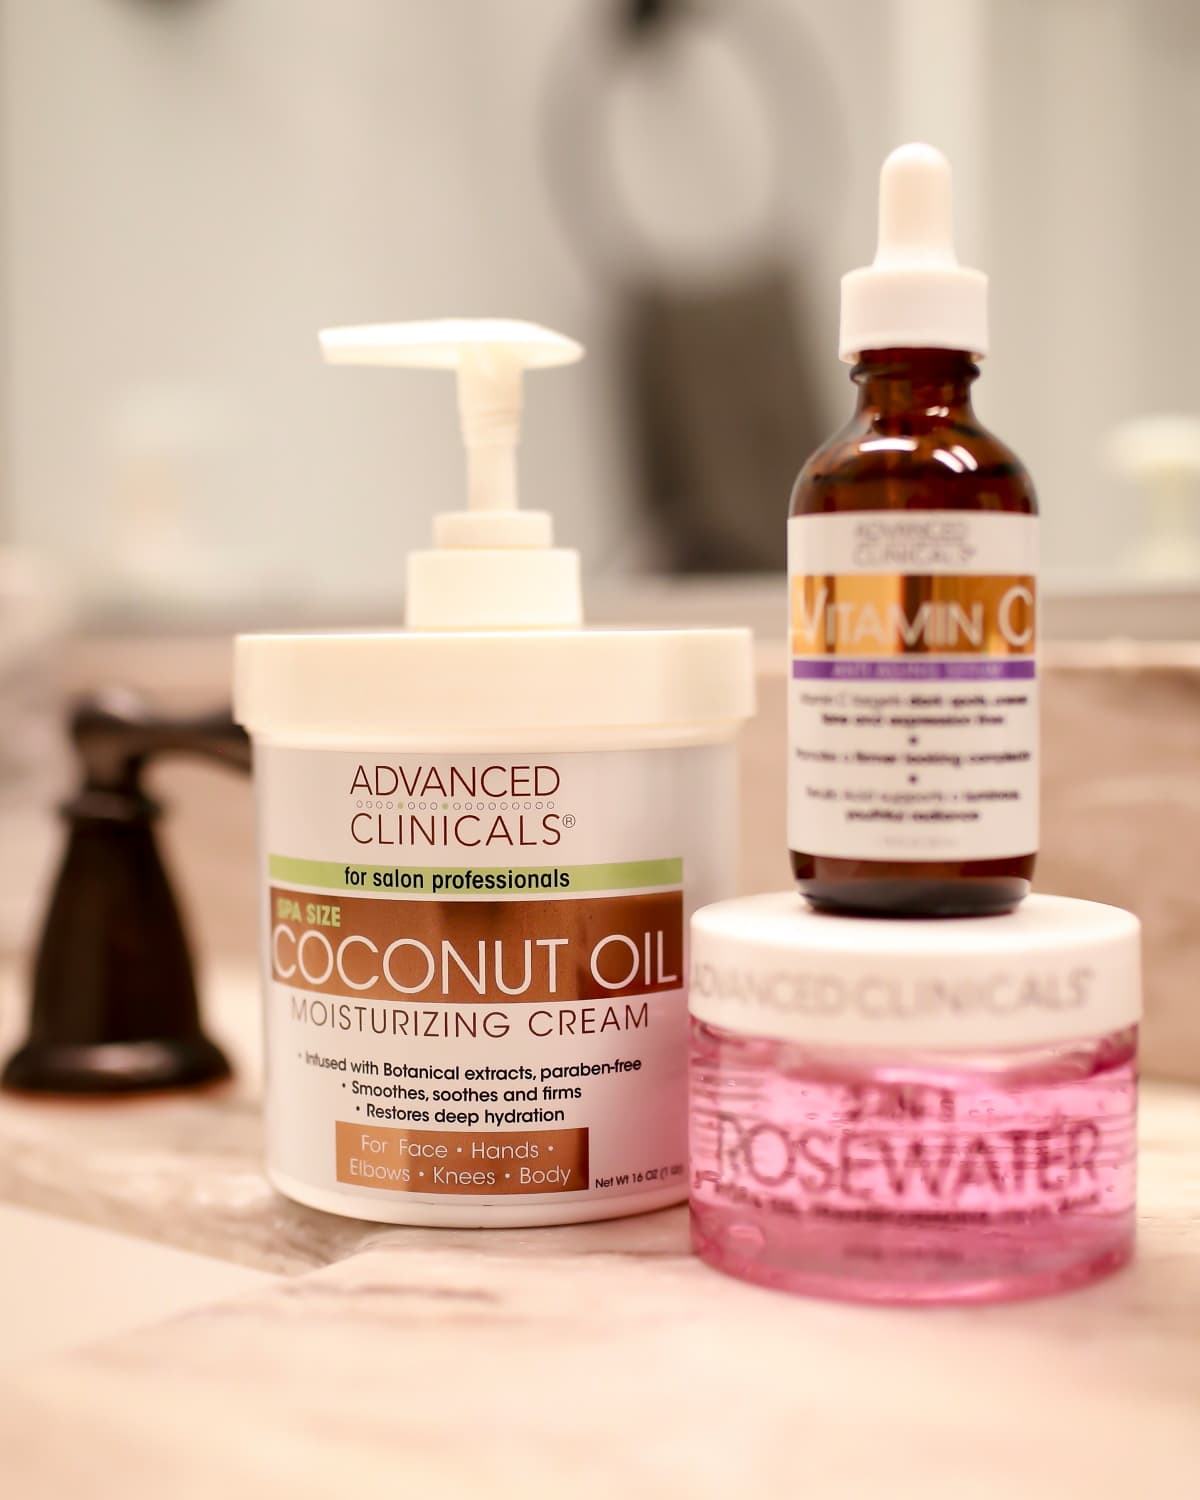 Advanced Clinicals Reviews: Vitamin C Serum, Coconut Oil Cream, and Rosewater Mask